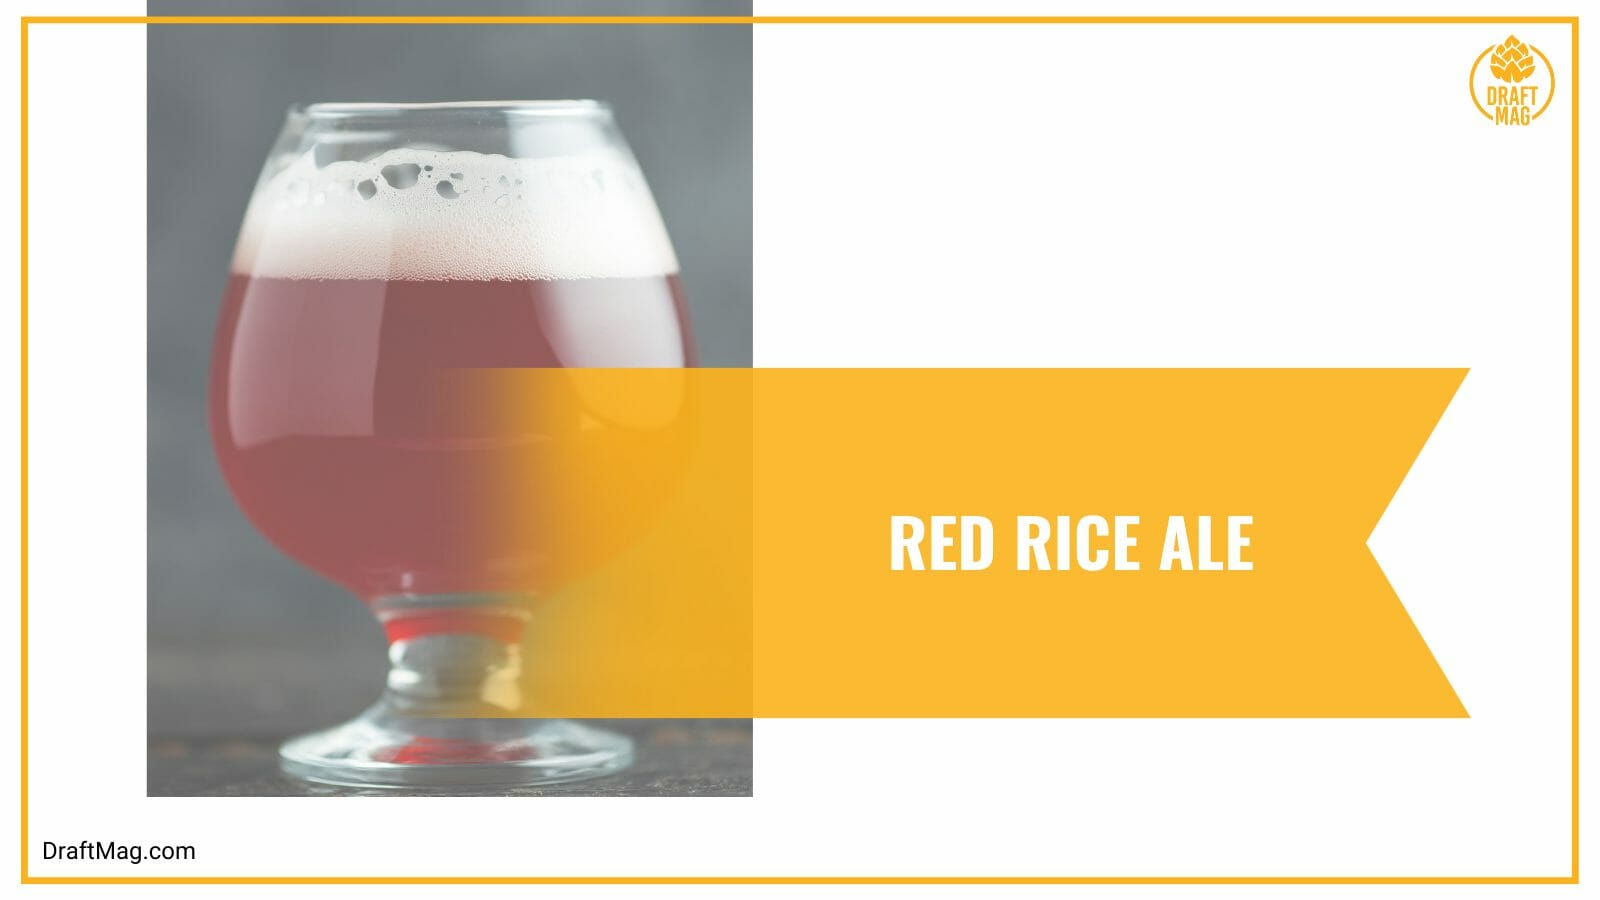 Red rice ale